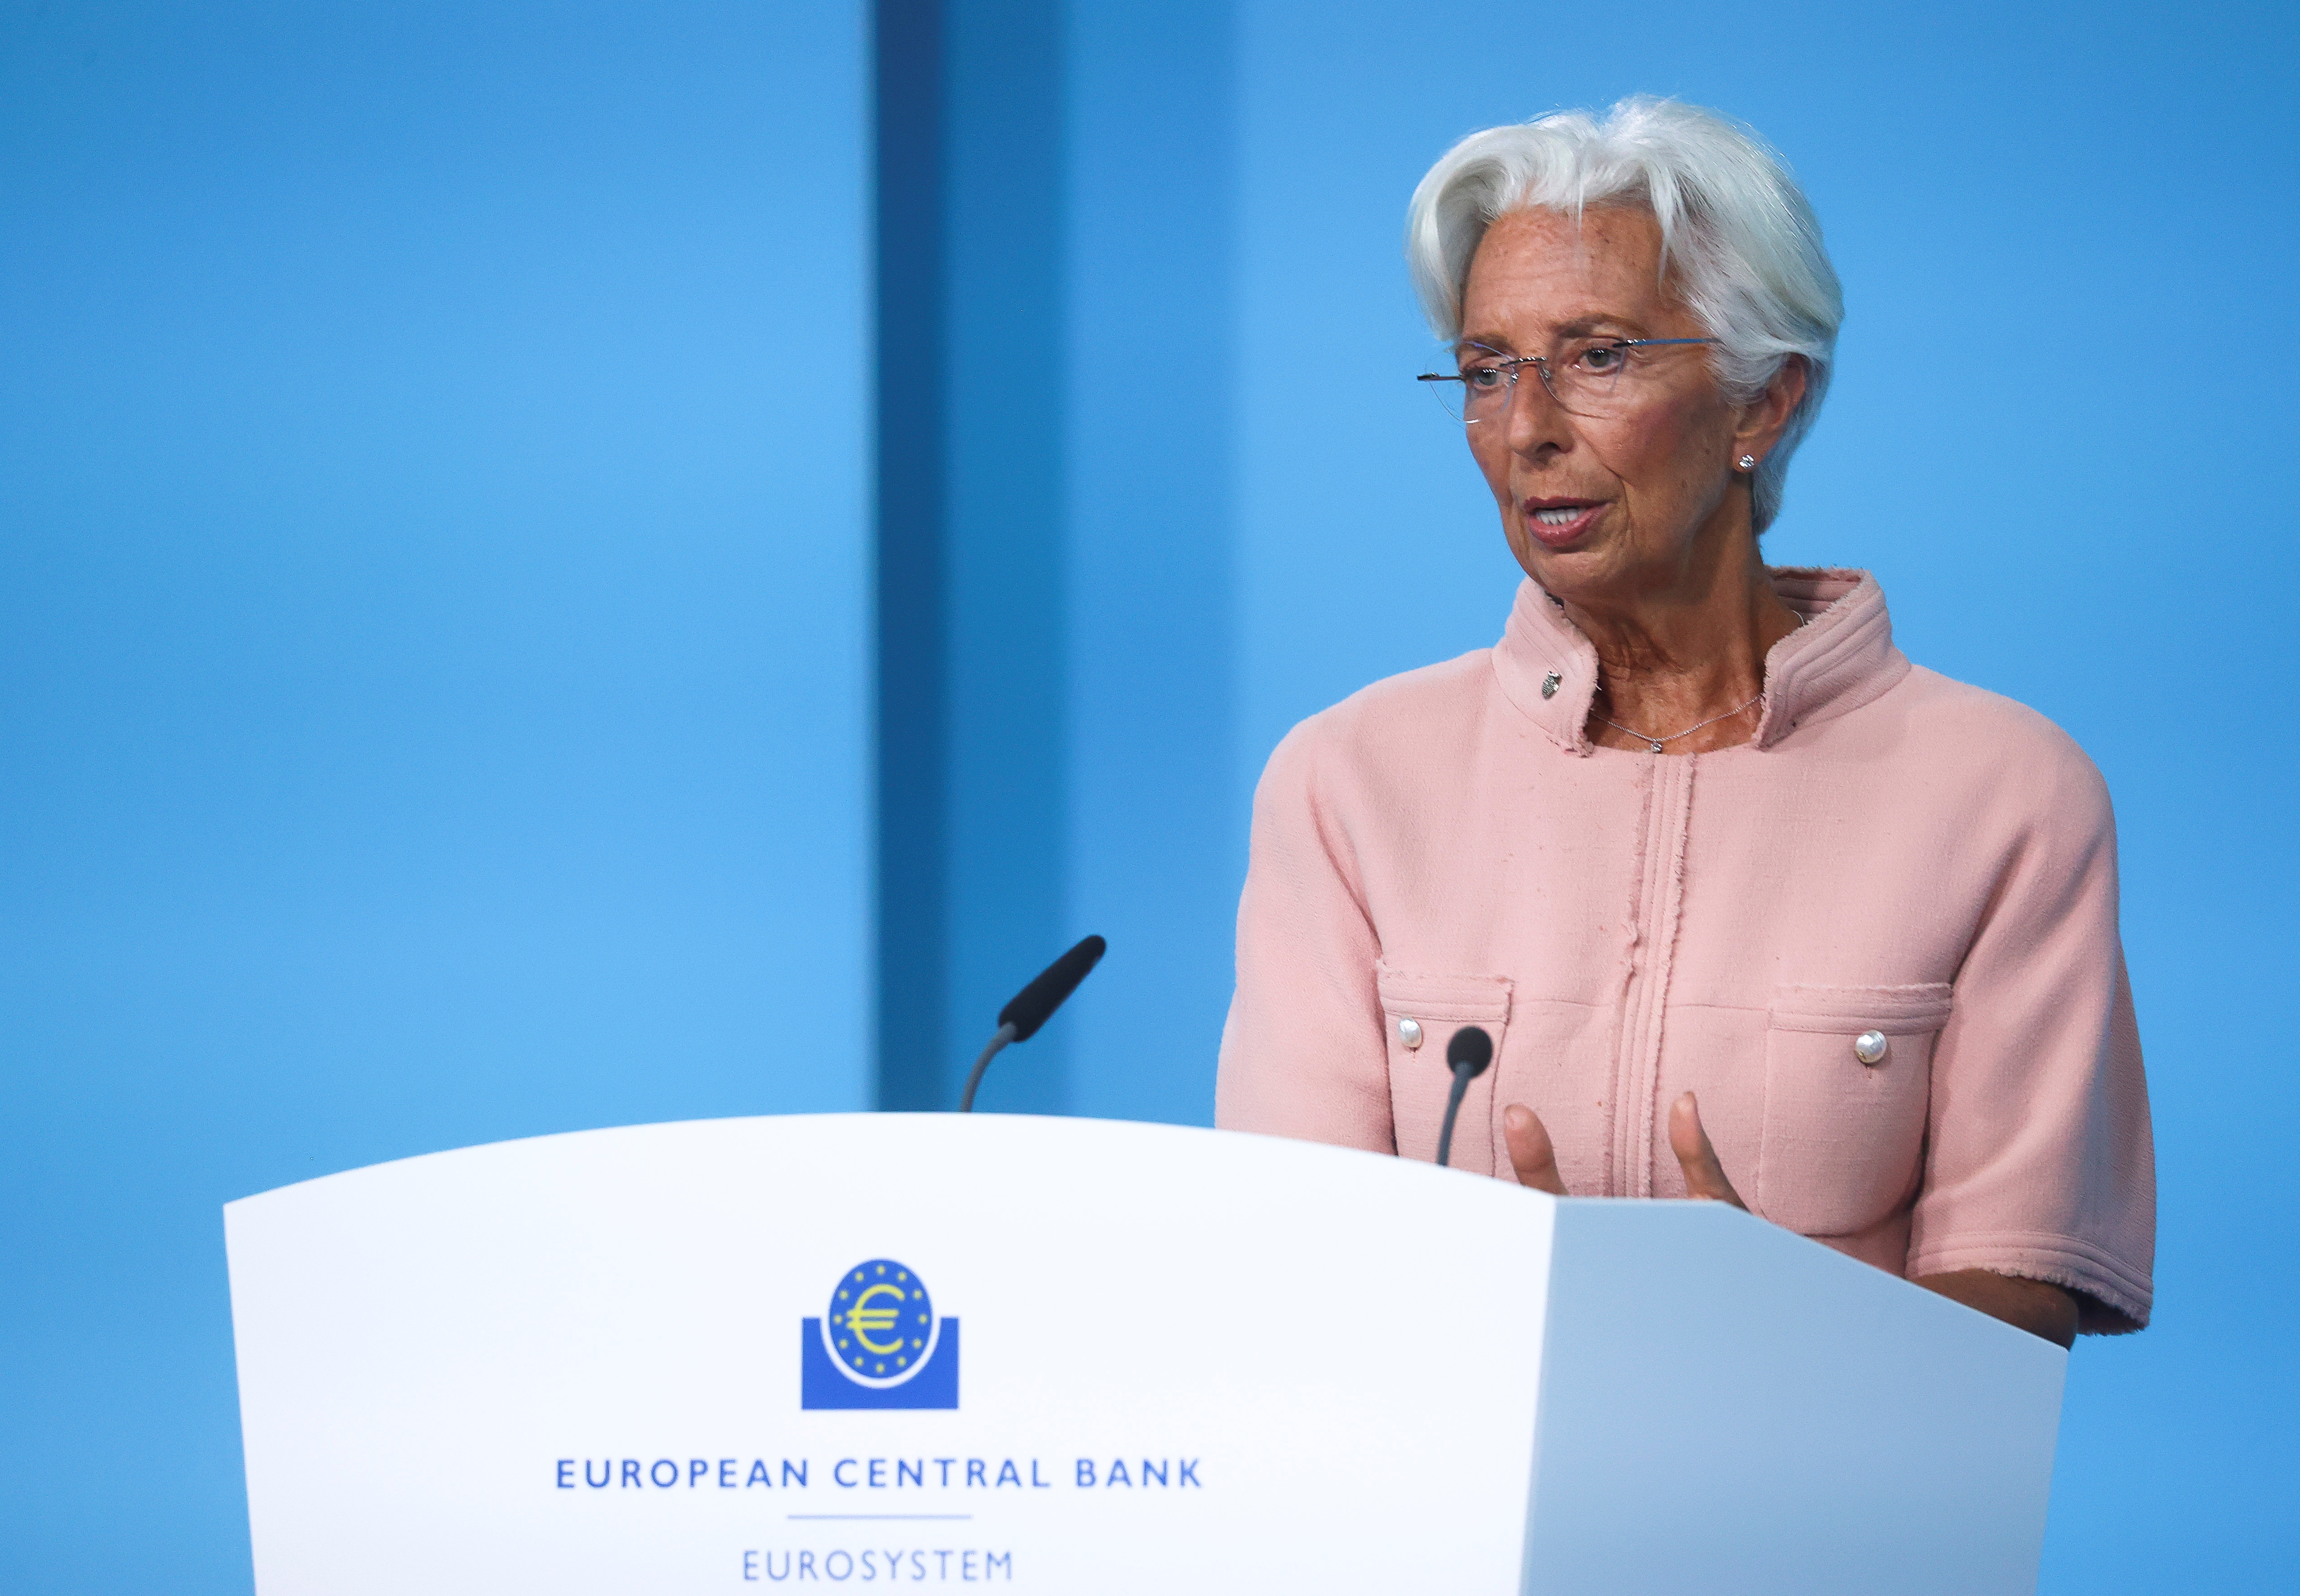 President of the European Central Bank (ECB) Christine Lagarde speaks as she takes part in a news conference on the outcome of the Governing Council meeting, in Frankfurt, Germany, September 9, 2021. REUTERS/Kai Pfaffenbach